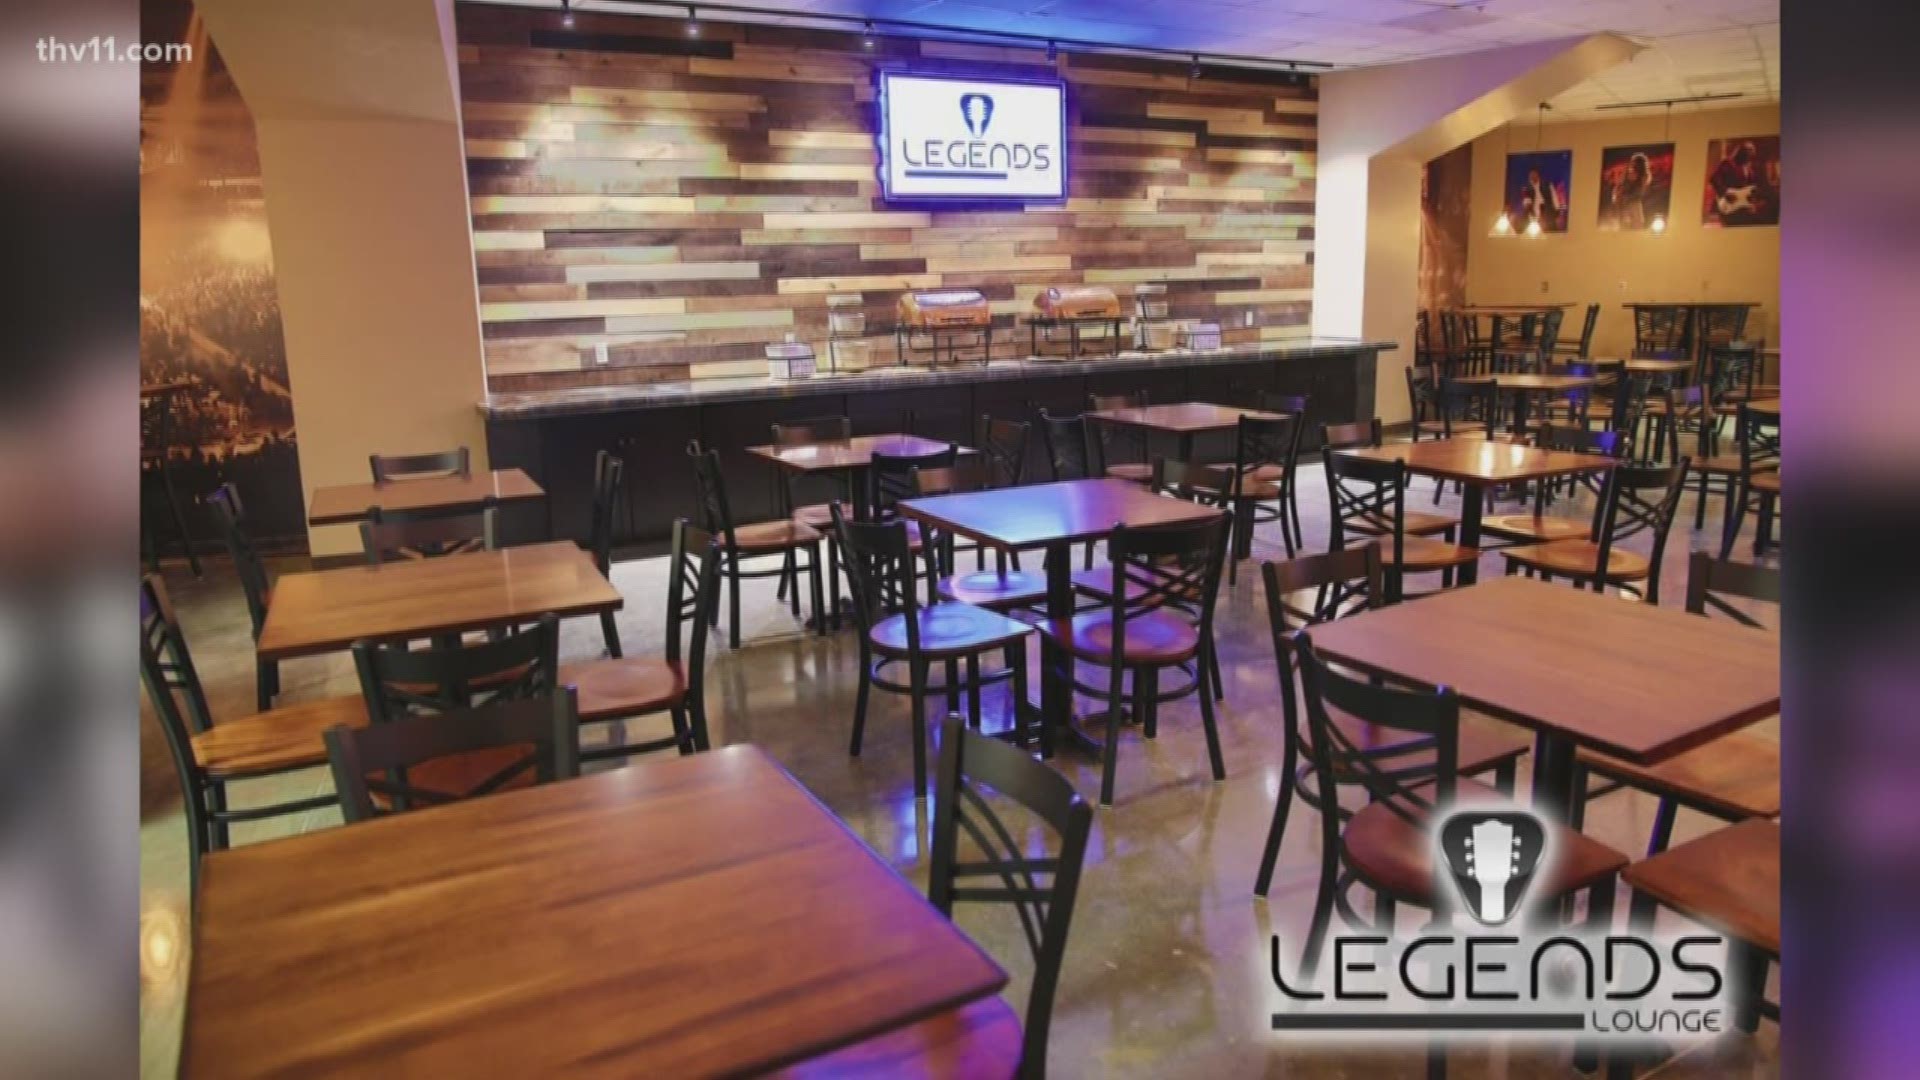 The lounge includes early access to the venue, a full buffet, drinks and private bathrooms.